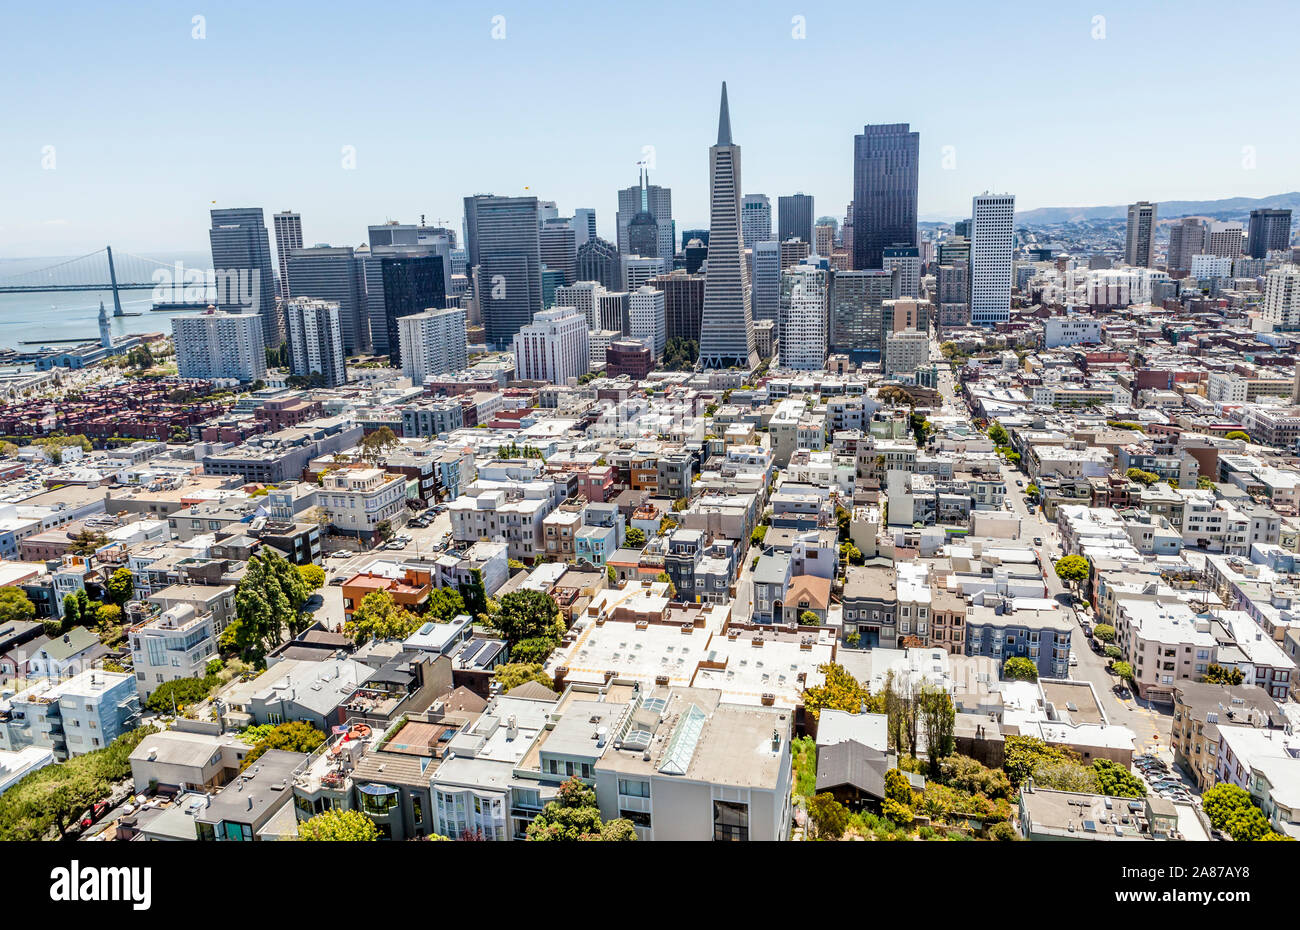 The view looking south from the top of Coit Tower in San Fransisco, California, USA. Stock Photo